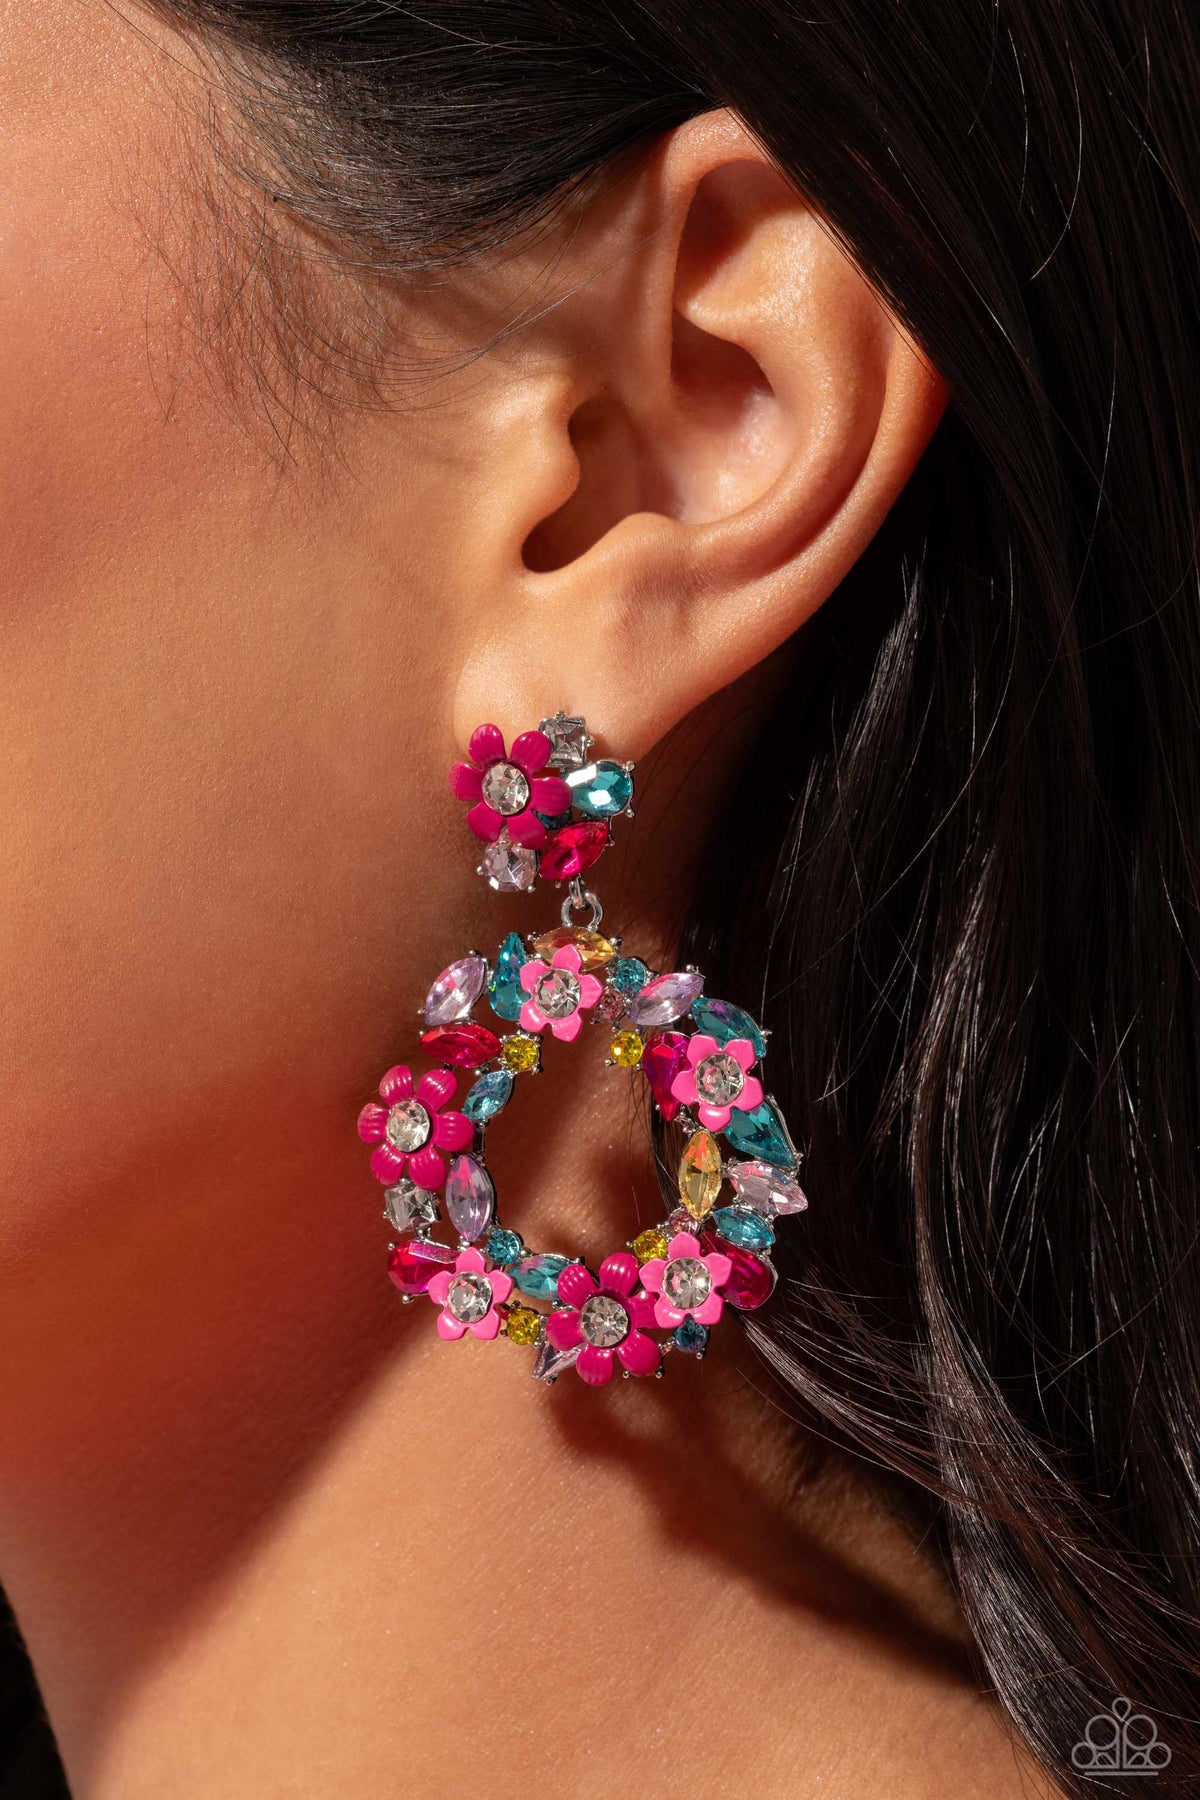 Wreathed in Wildflowers Multi Post Earrings - Paparazzi Accessories-on model - CarasShop.com - $5 Jewelry by Cara Jewels